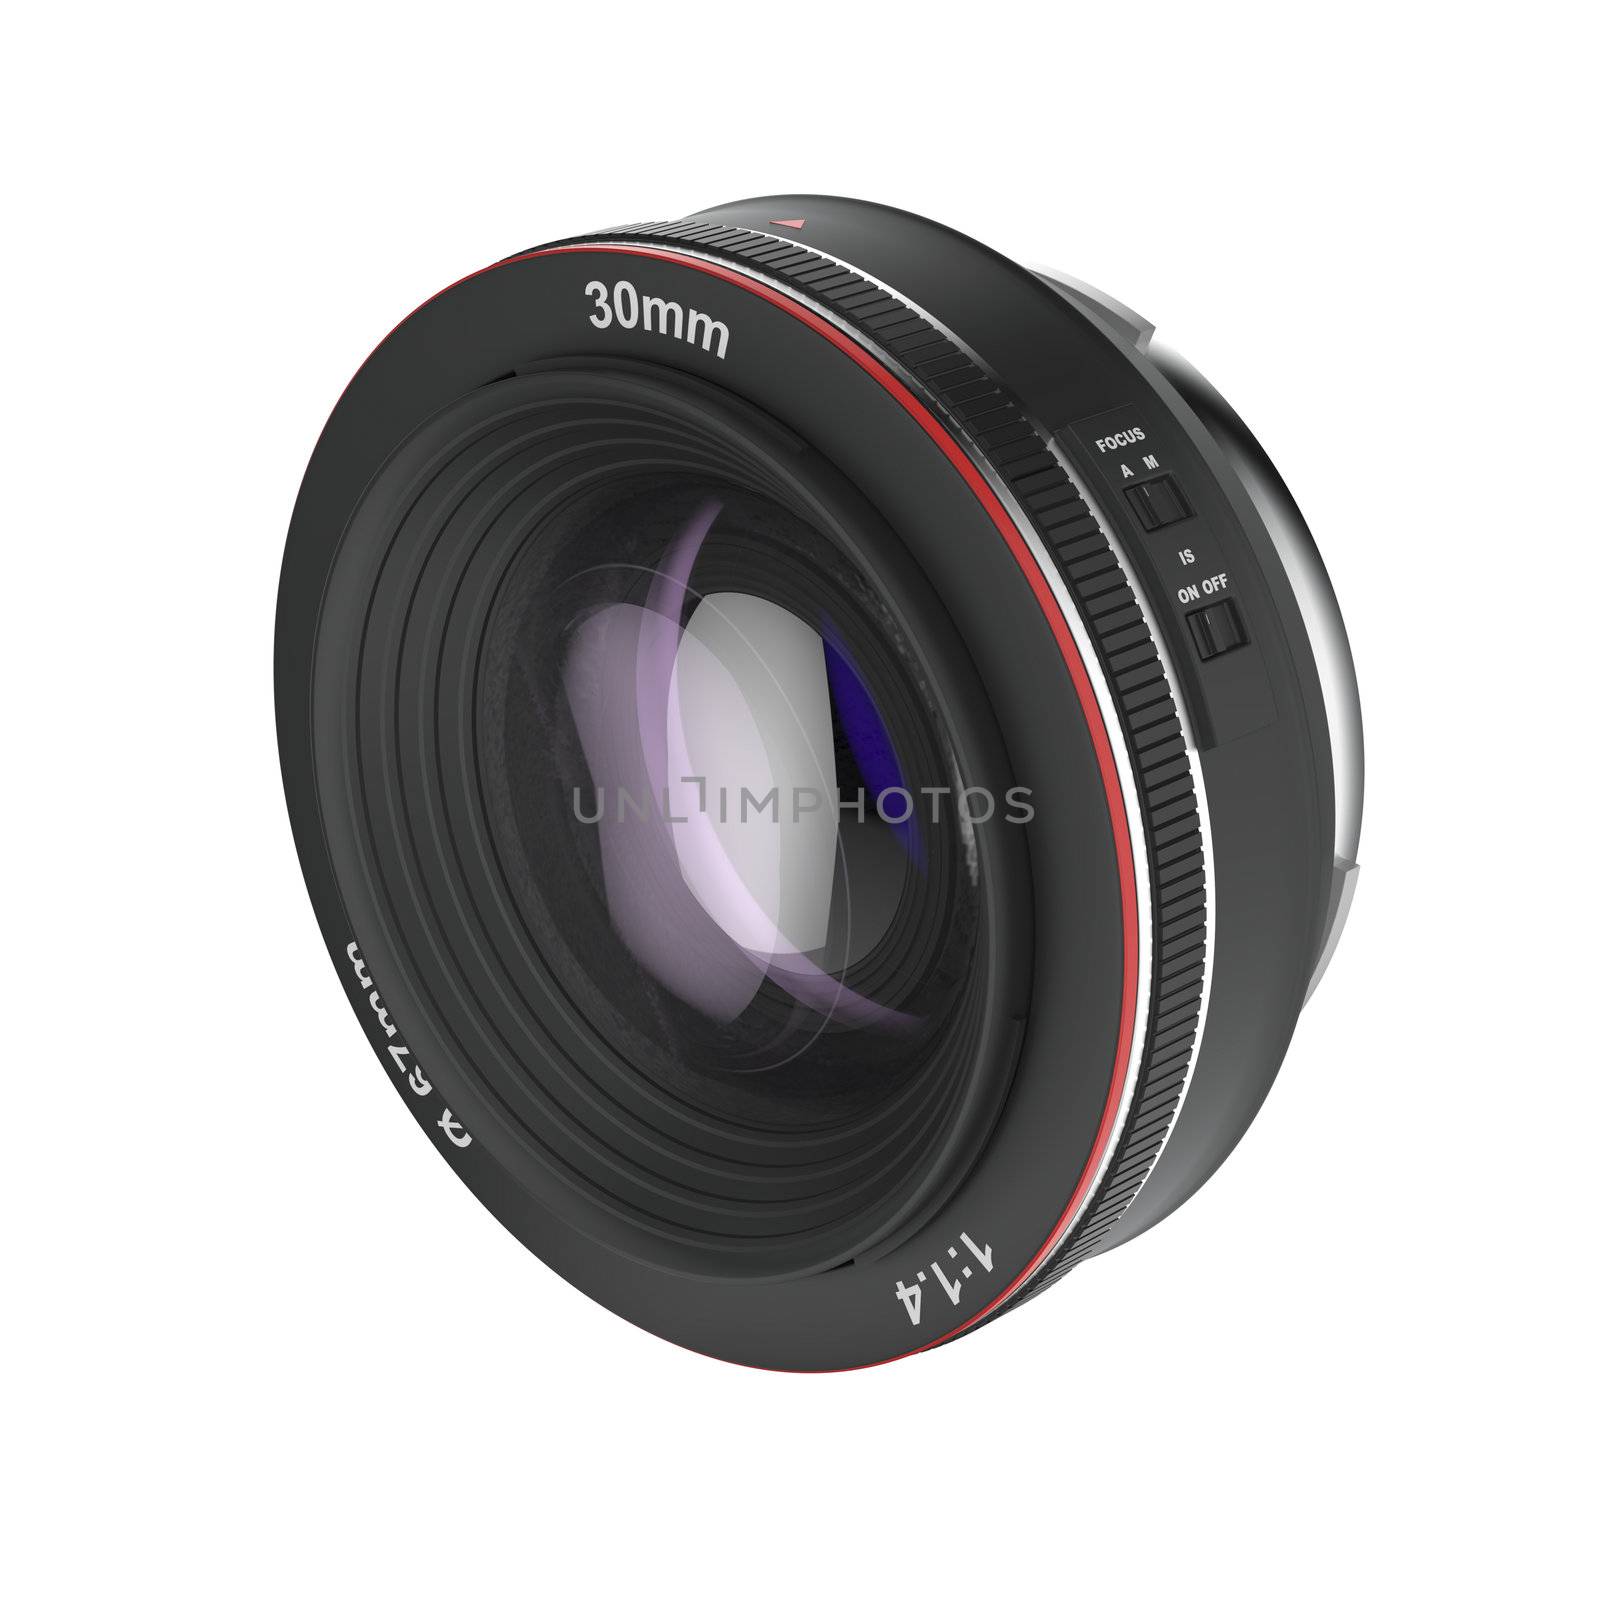 Prime lens by magraphics